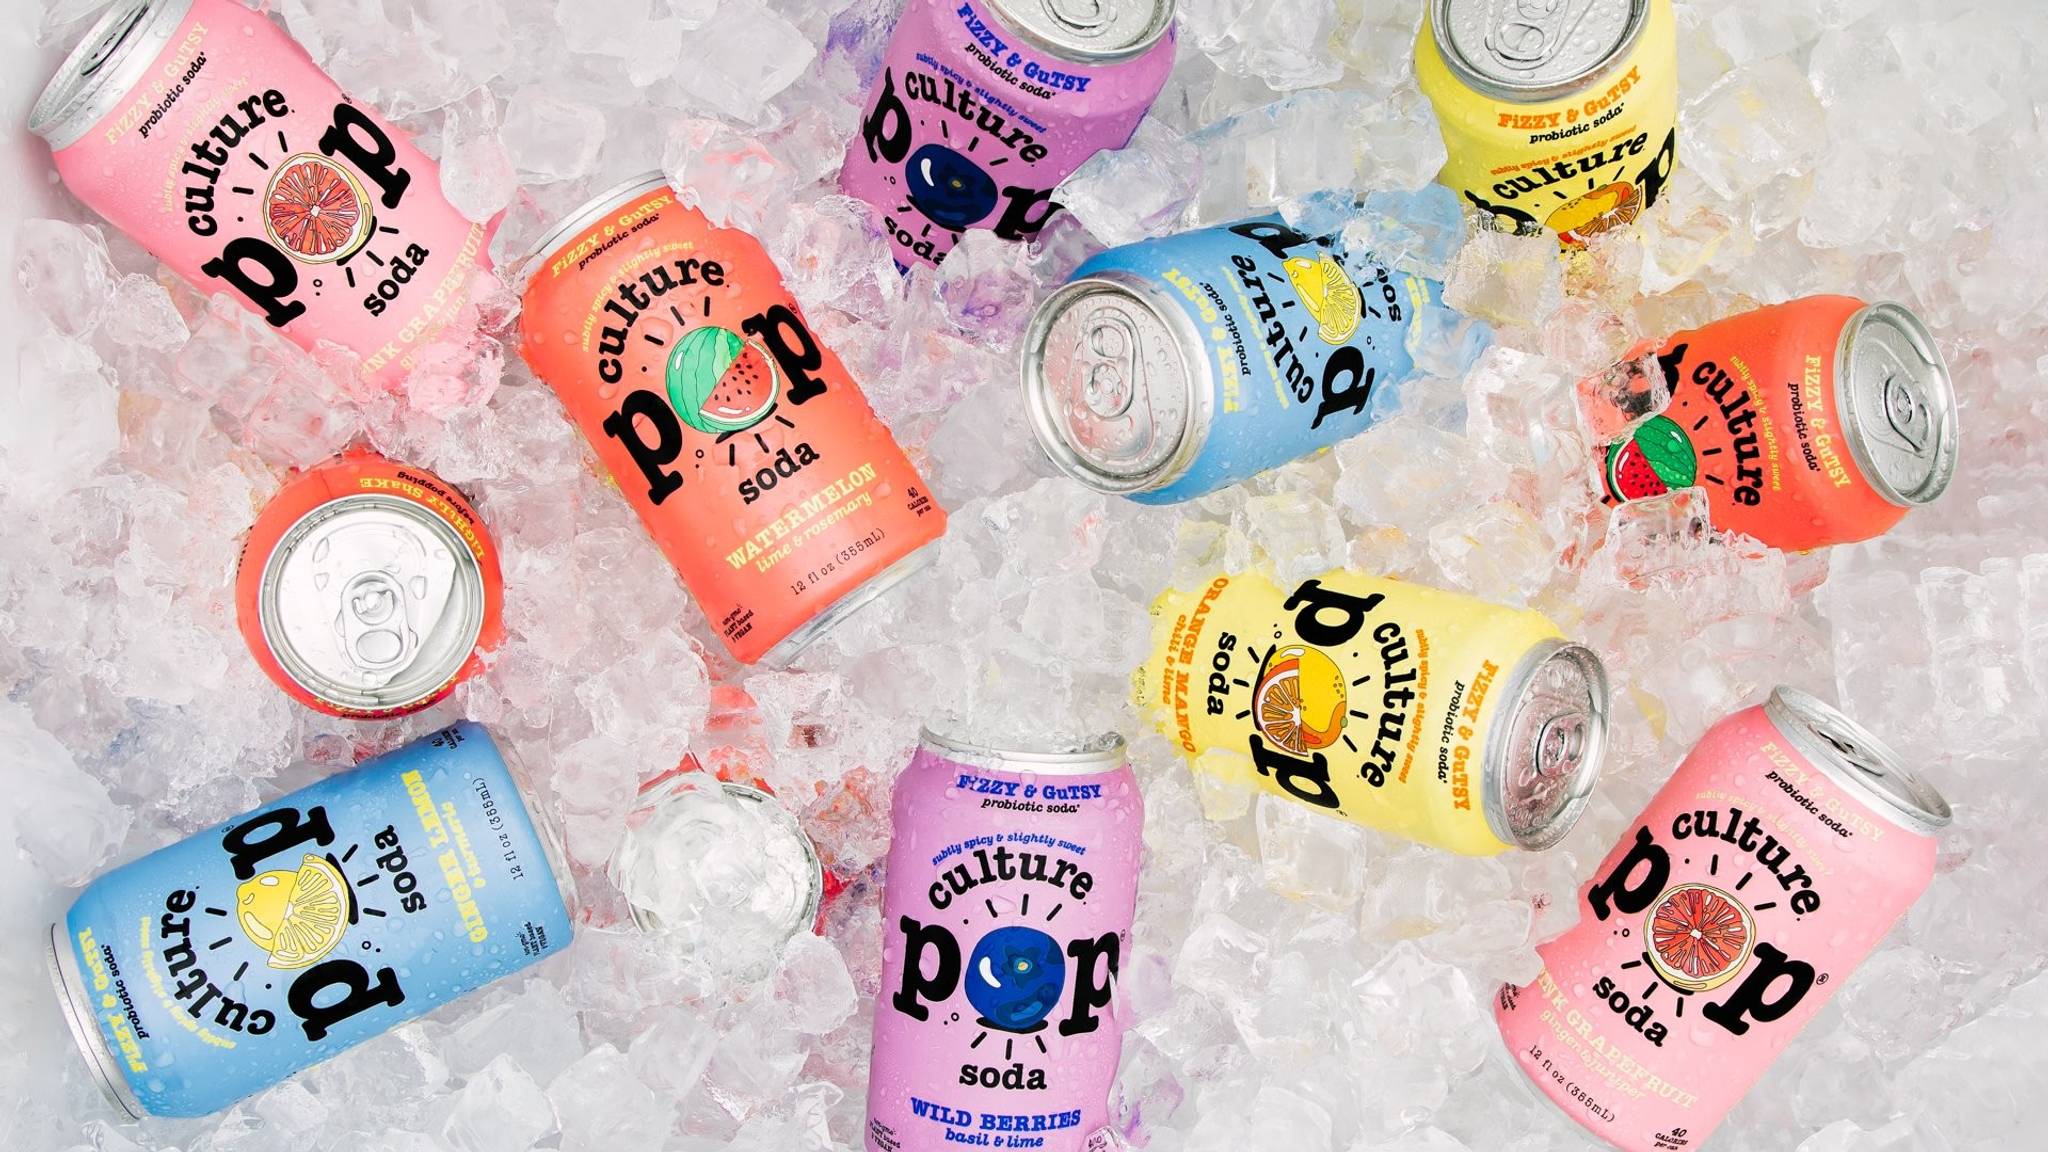 Culture Pop Soda: new-wave carbonated drinks